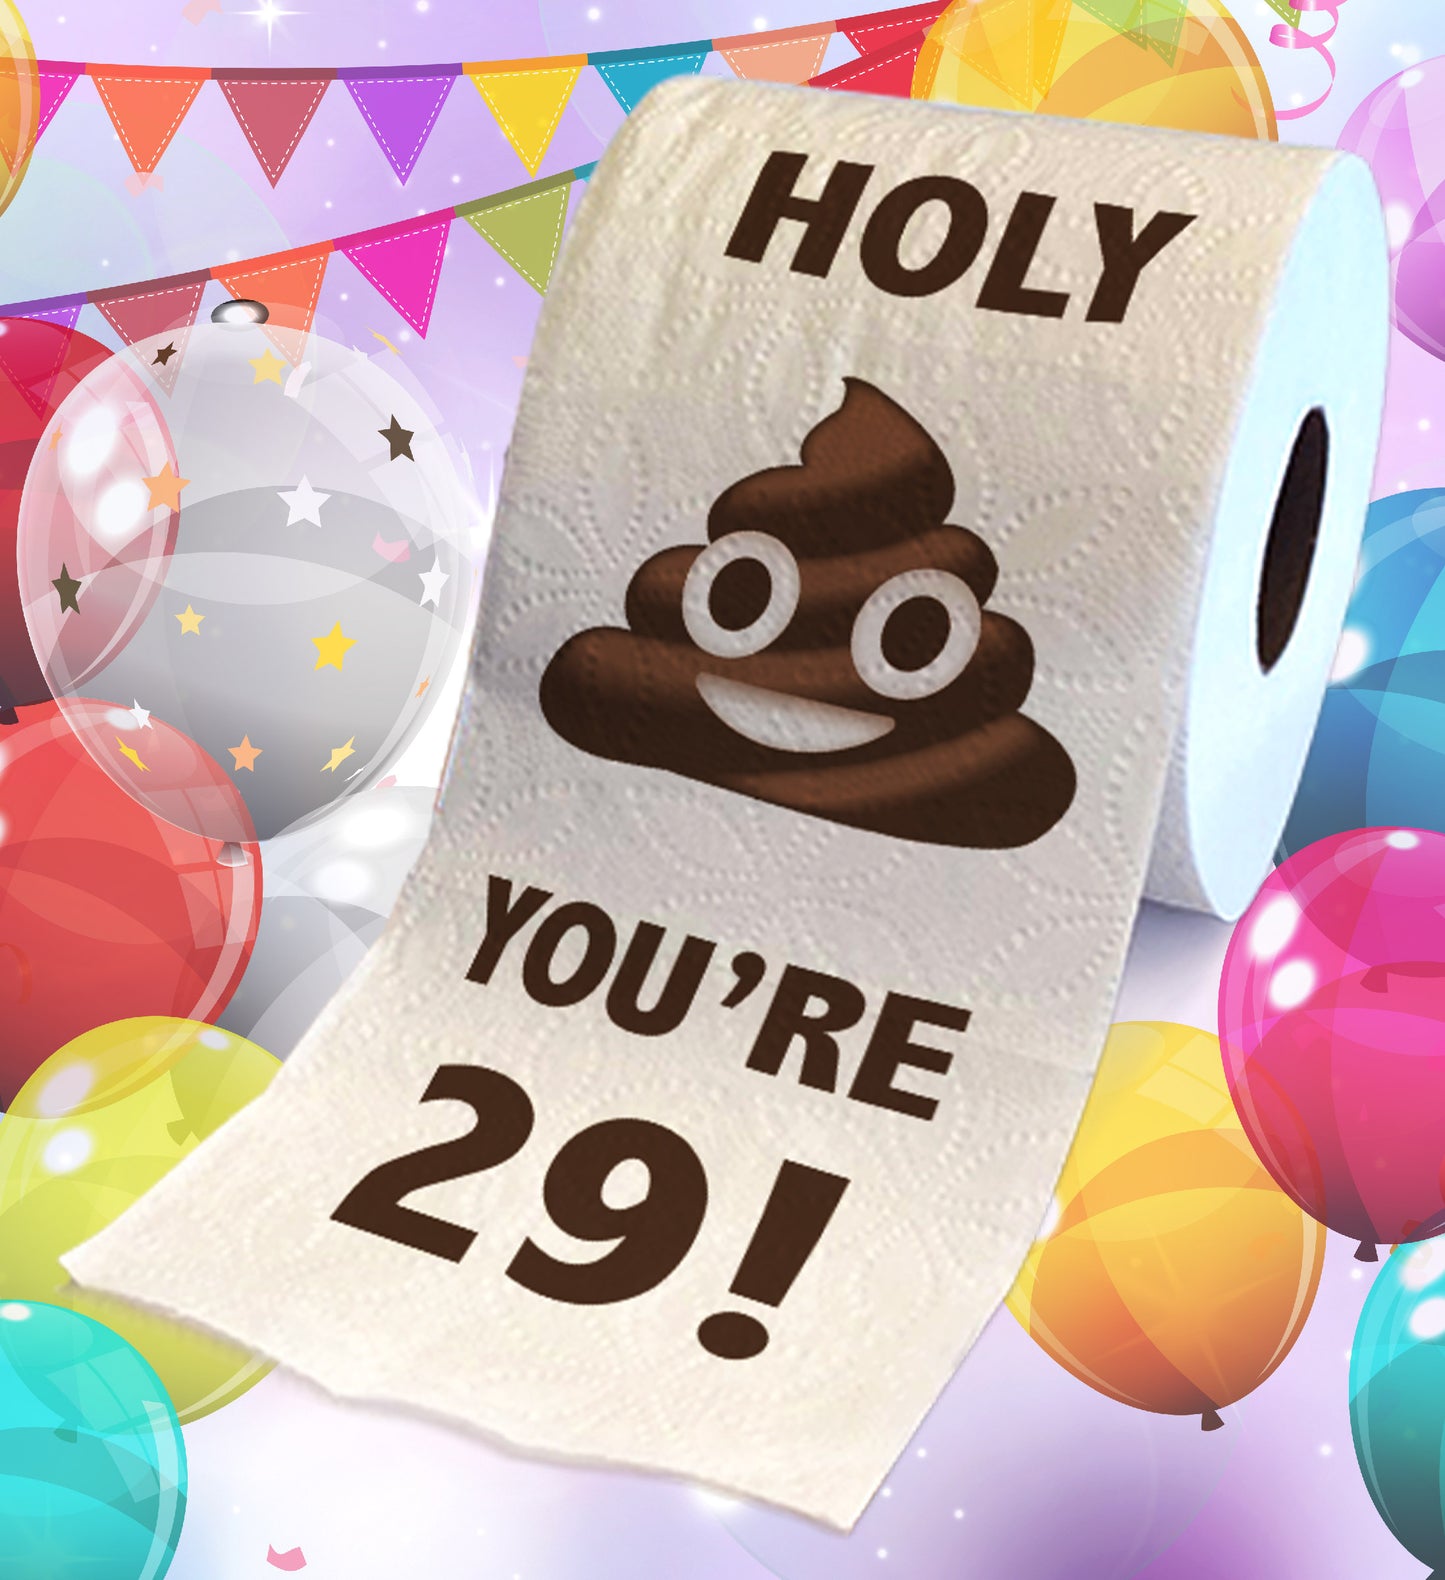 Printed TP Holy Poop You're 29 Printed Toilet Paper Funny Gag Gift – 500 Sheets